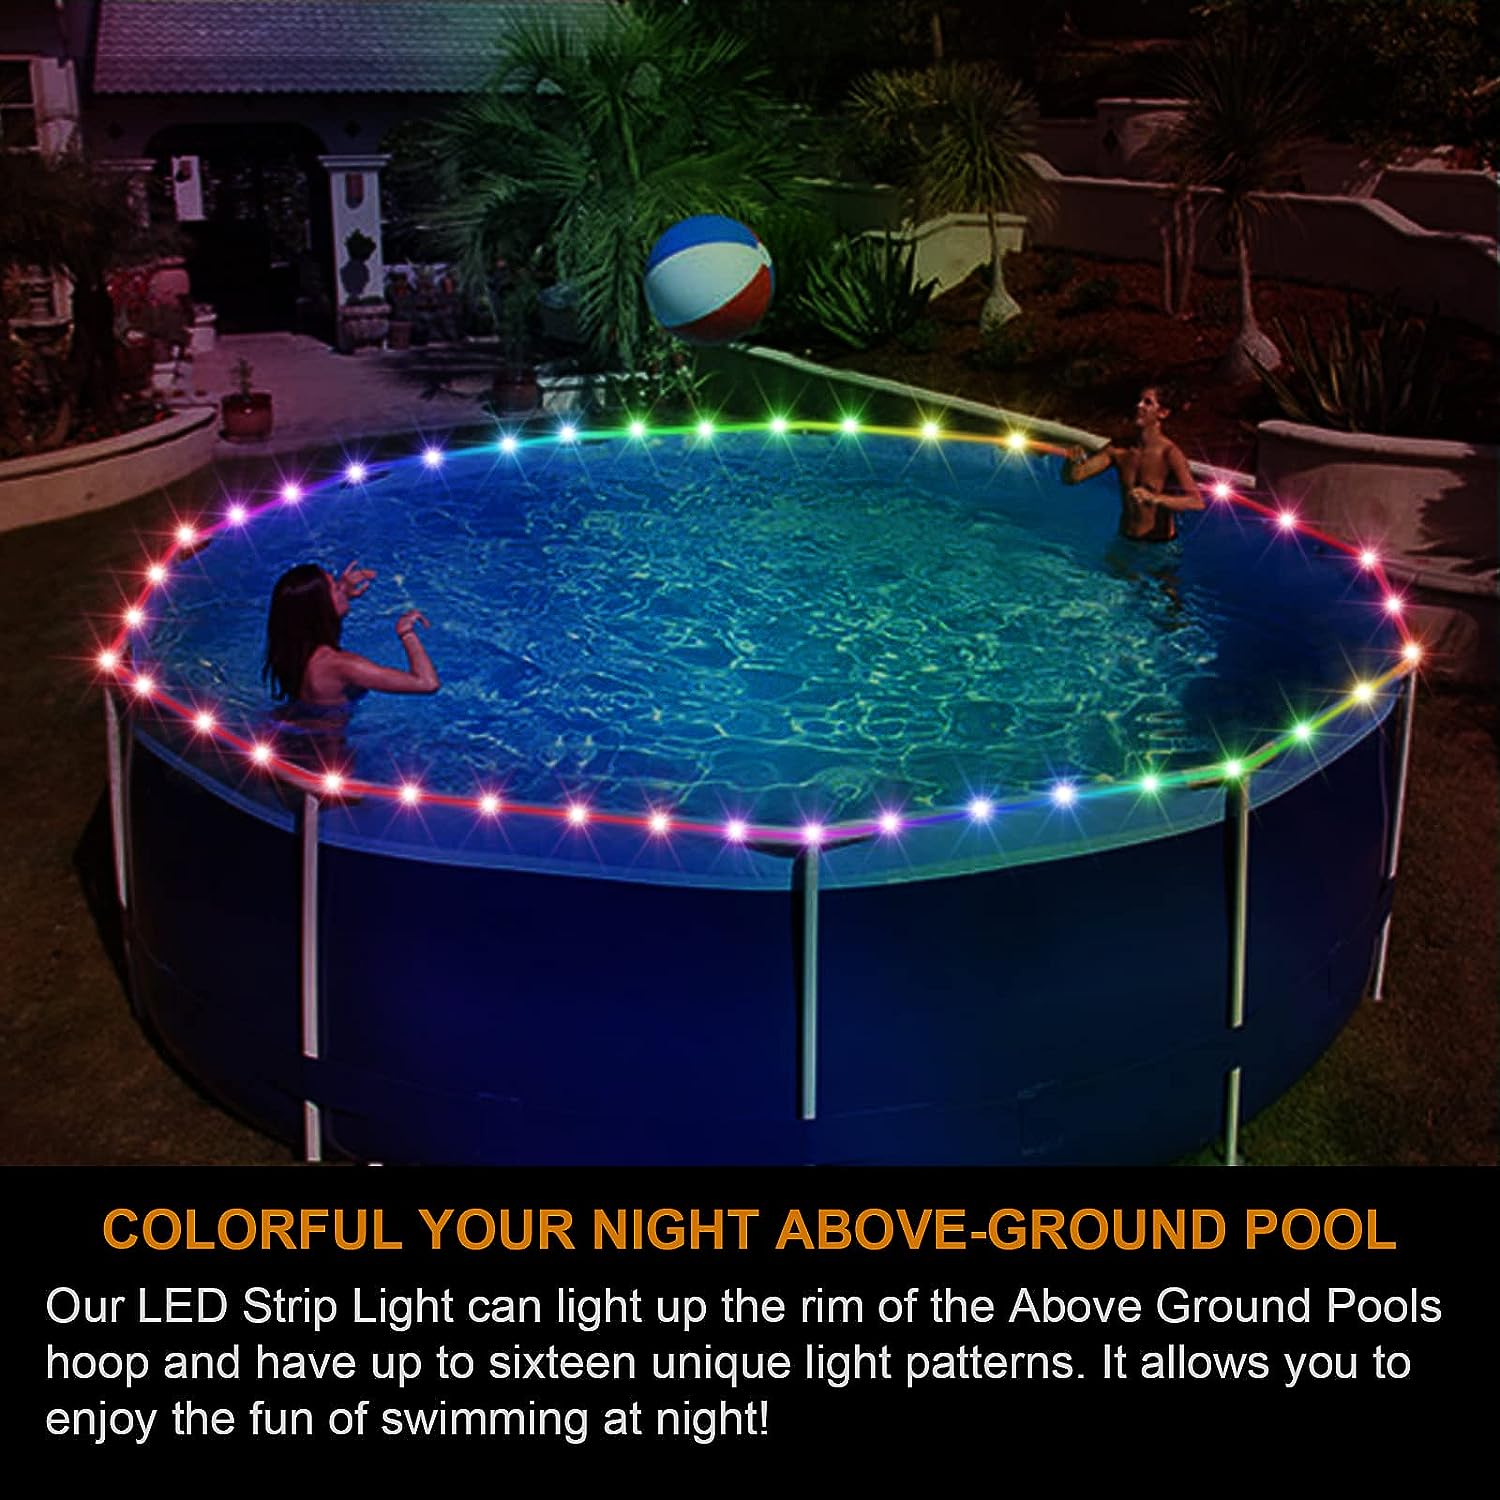 Ehaijia Remote Control LED Pool Lights Review